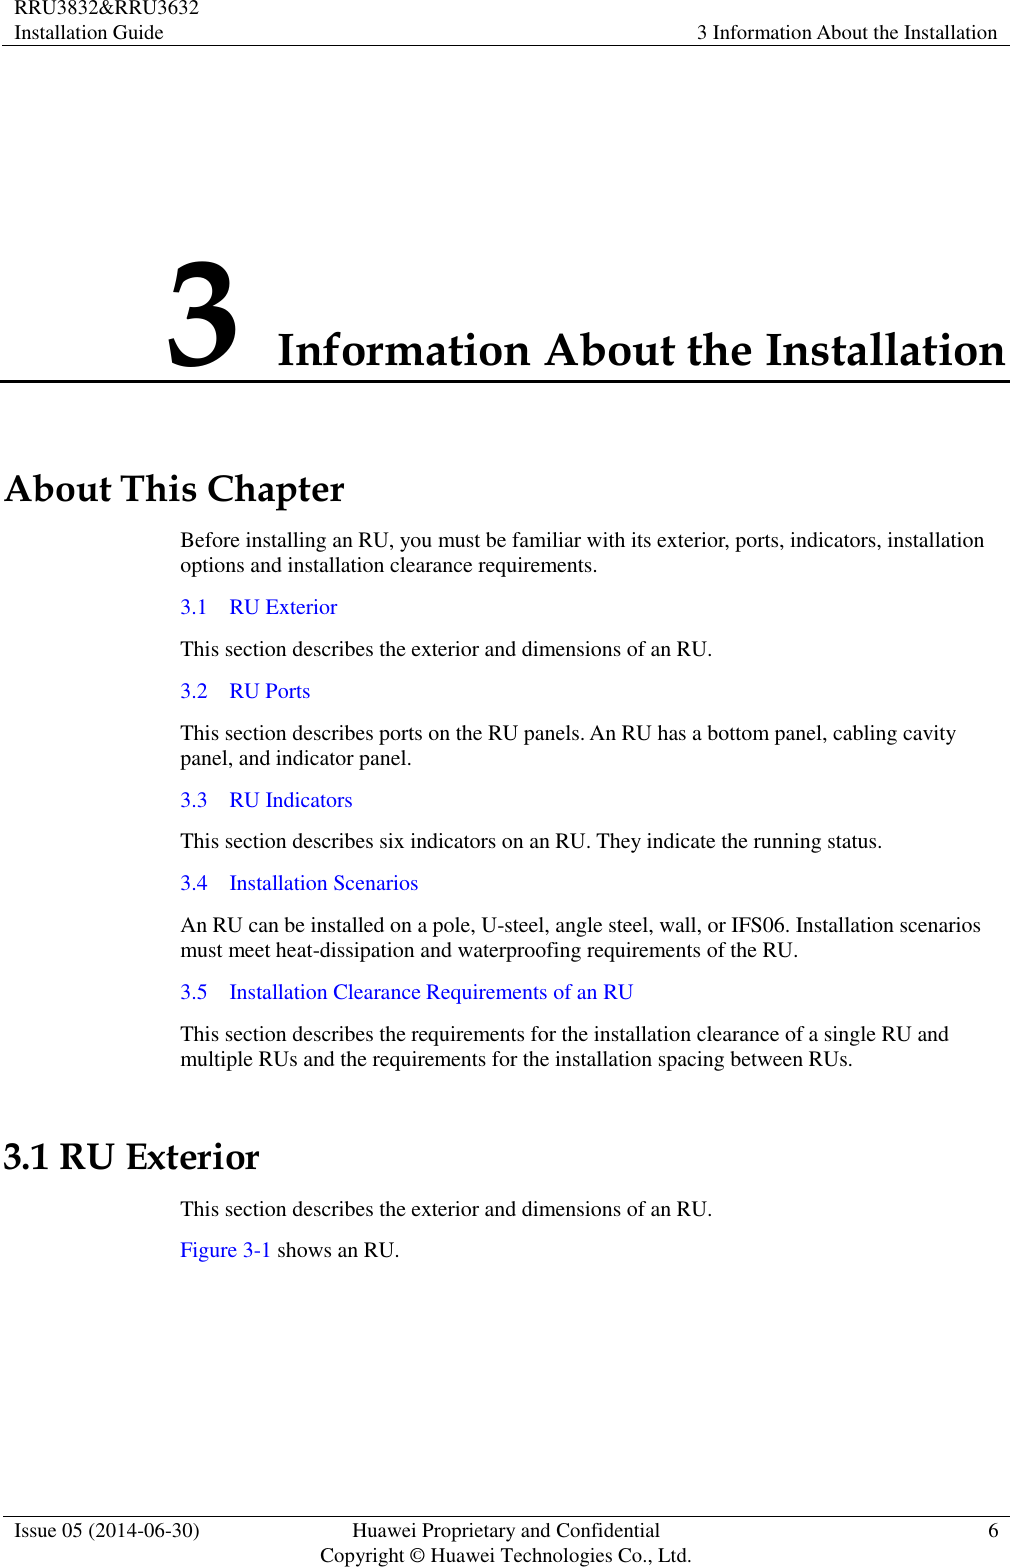 RRU3832&amp;RRU3632 Installation Guide 3 Information About the Installation  Issue 05 (2014-06-30) Huawei Proprietary and Confidential                                     Copyright © Huawei Technologies Co., Ltd. 6  3 Information About the Installation About This Chapter Before installing an RU, you must be familiar with its exterior, ports, indicators, installation options and installation clearance requirements. 3.1    RU Exterior This section describes the exterior and dimensions of an RU. 3.2    RU Ports This section describes ports on the RU panels. An RU has a bottom panel, cabling cavity panel, and indicator panel. 3.3    RU Indicators This section describes six indicators on an RU. They indicate the running status.   3.4    Installation Scenarios An RU can be installed on a pole, U-steel, angle steel, wall, or IFS06. Installation scenarios must meet heat-dissipation and waterproofing requirements of the RU. 3.5    Installation Clearance Requirements of an RU This section describes the requirements for the installation clearance of a single RU and multiple RUs and the requirements for the installation spacing between RUs. 3.1 RU Exterior This section describes the exterior and dimensions of an RU. Figure 3-1 shows an RU.   